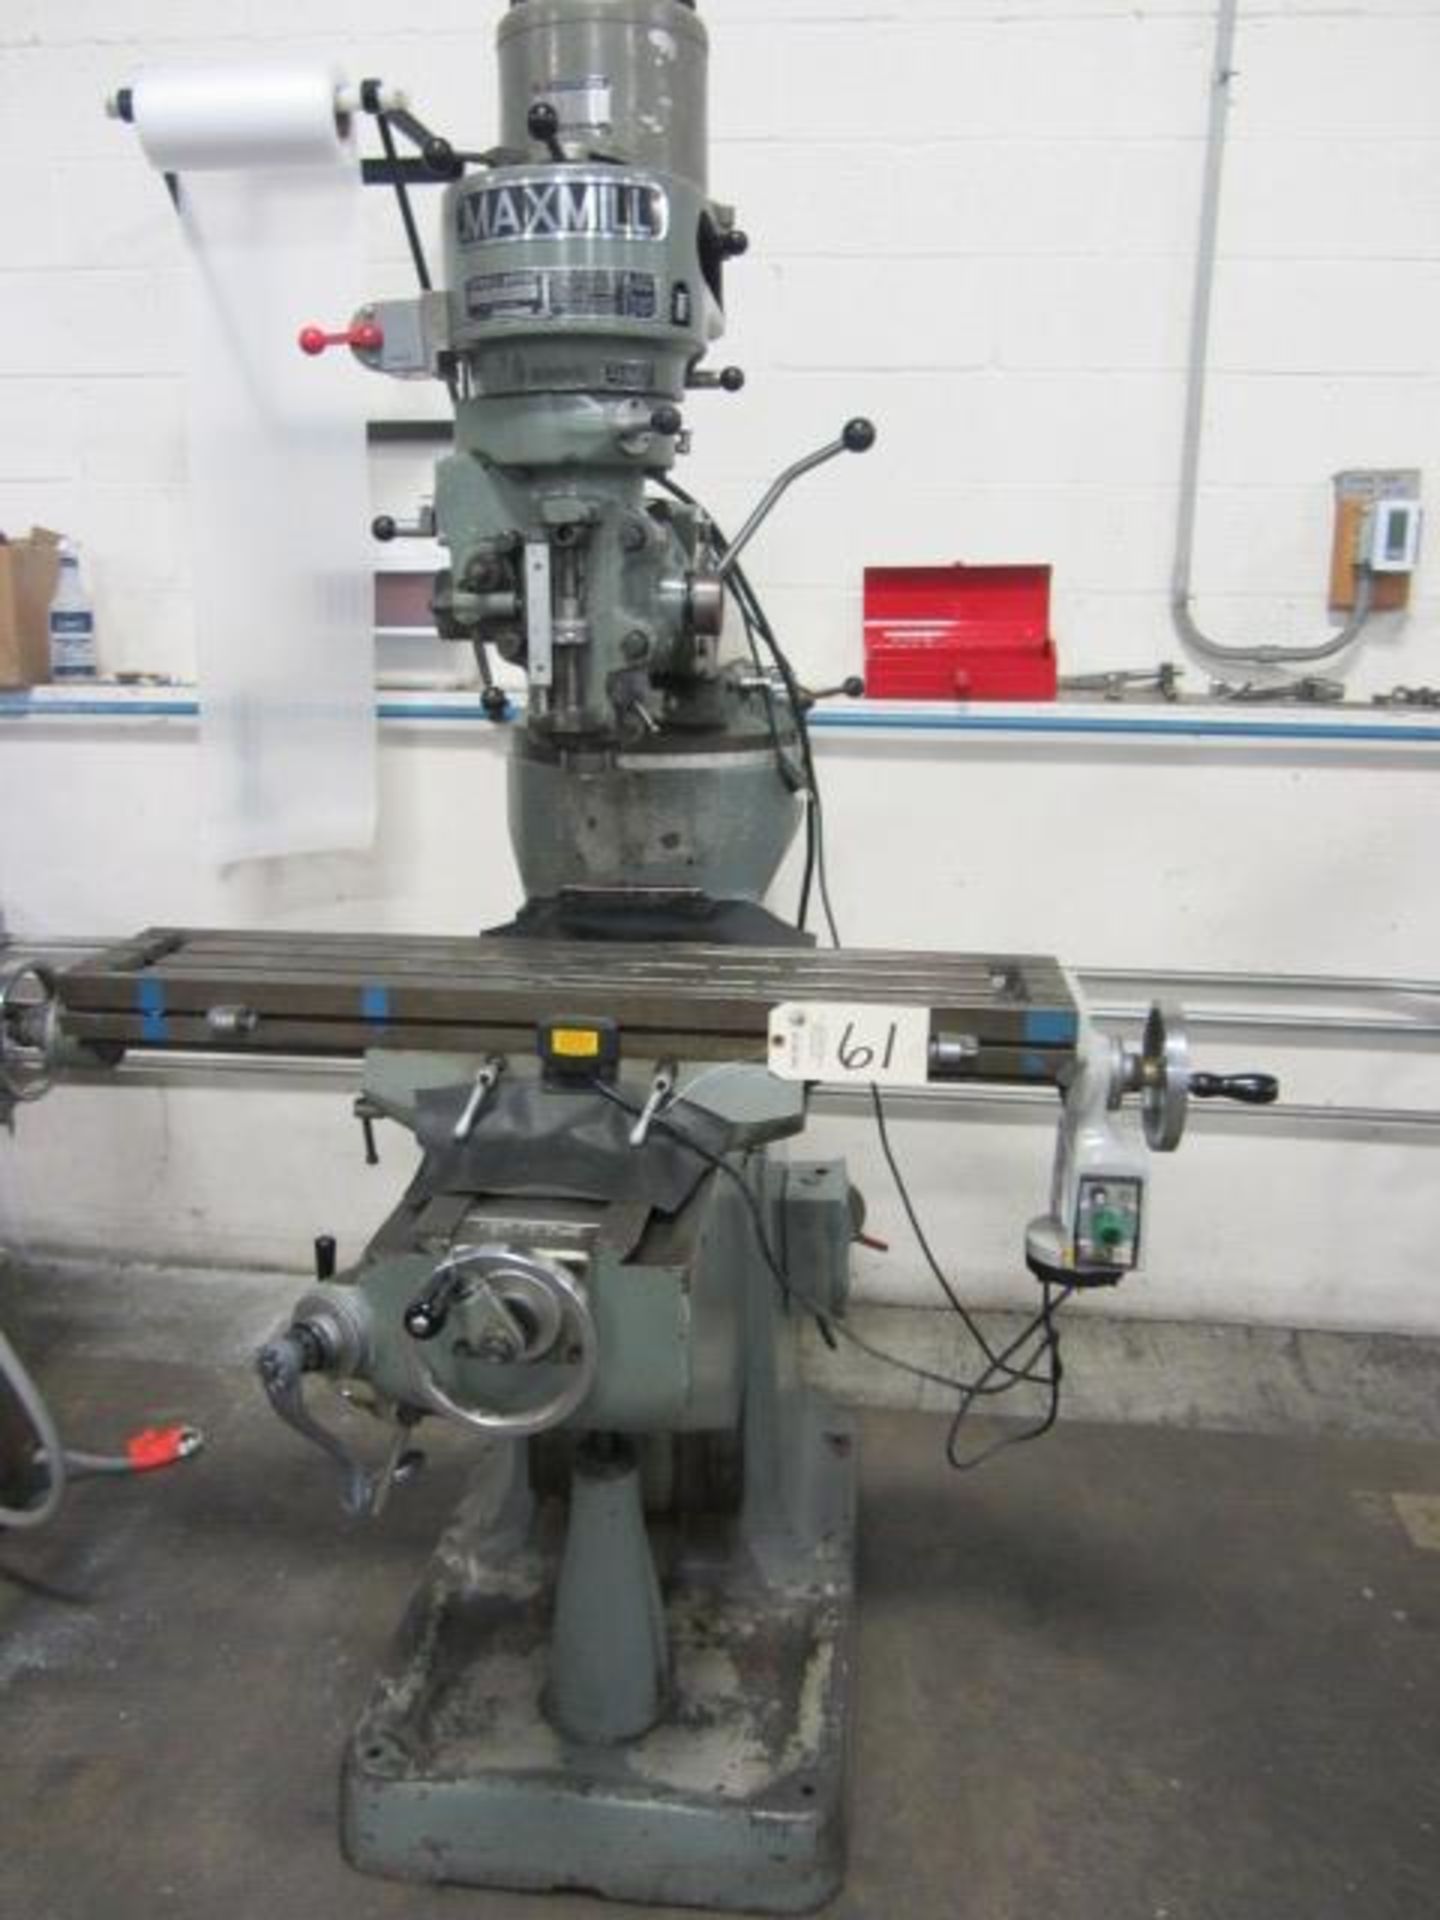 Maxmill Vertical Milling Machine with 9'' x 42'' Power Feed Table, R-8 Spindle Speeds to 2720 RPM, - Bild 3 aus 6